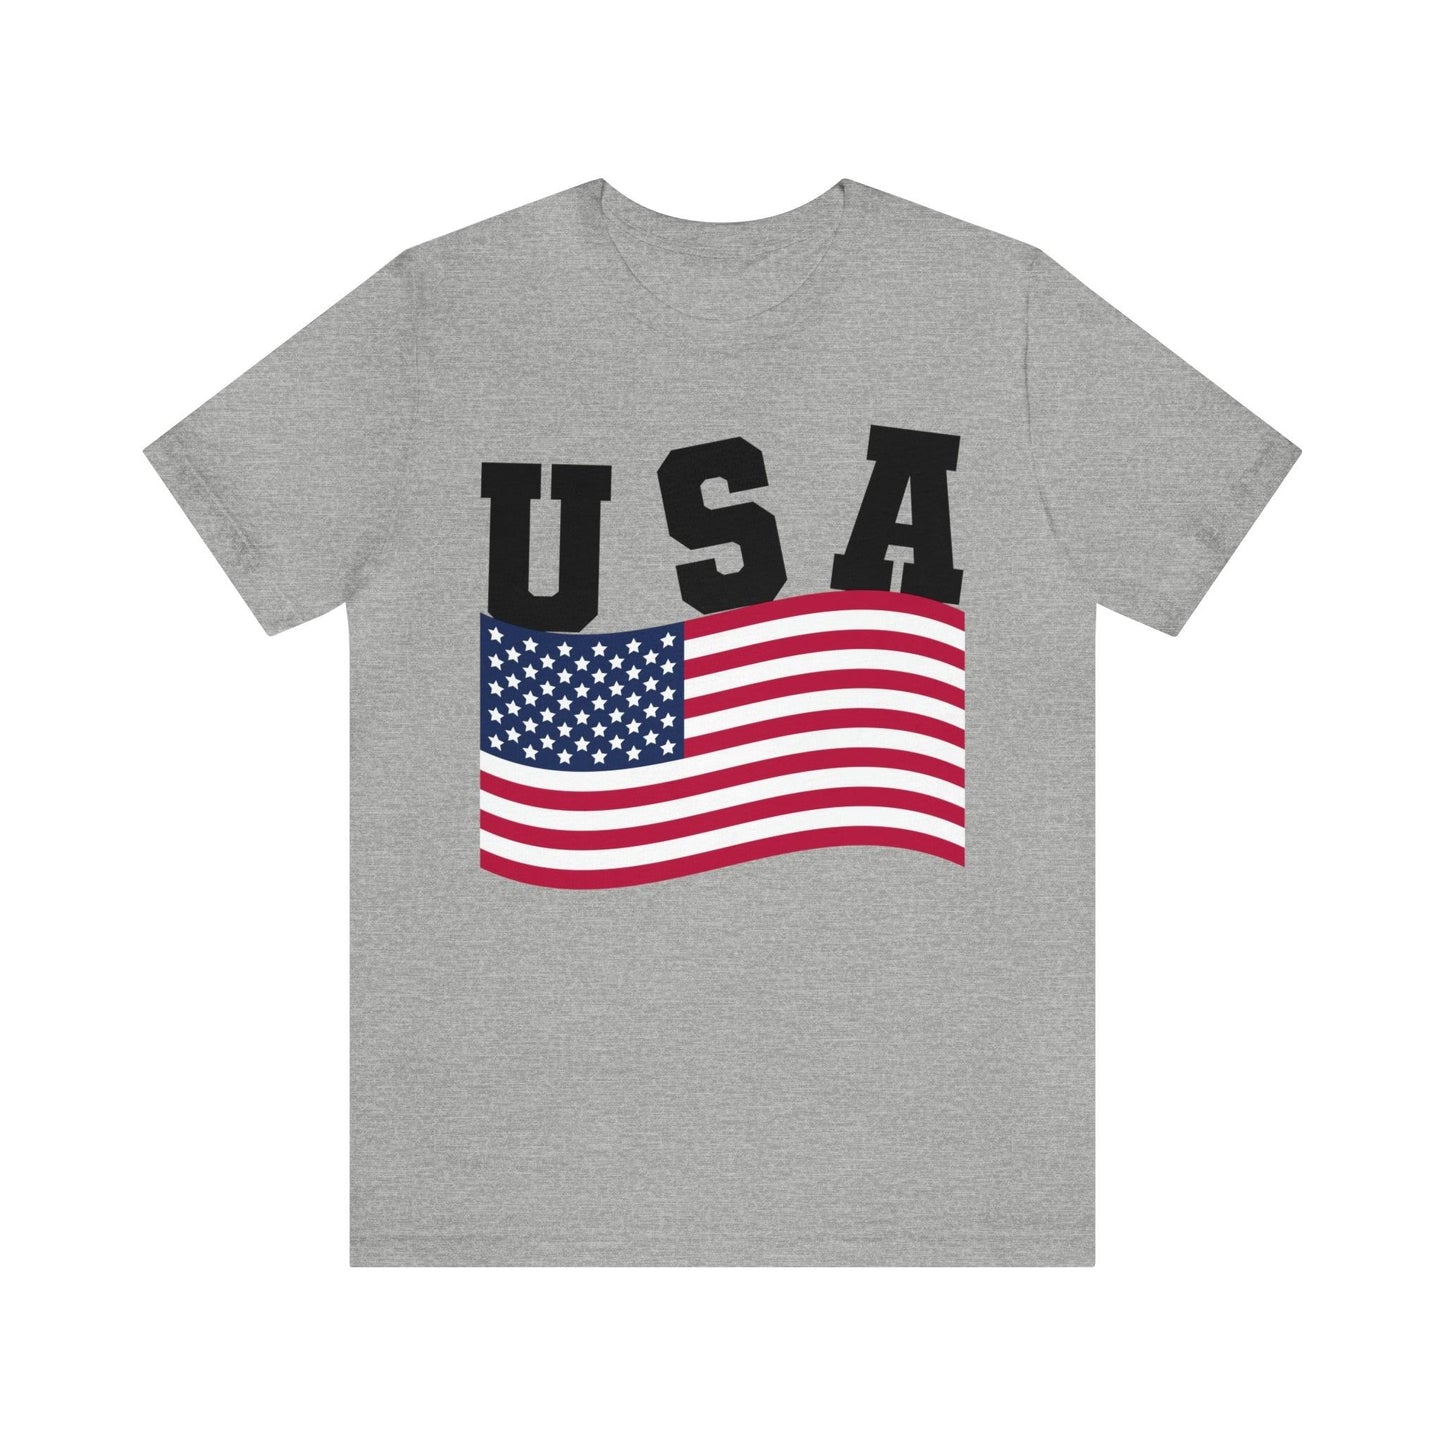 American flag shirt, Red, white, and blue shirt, 4th of July shirt